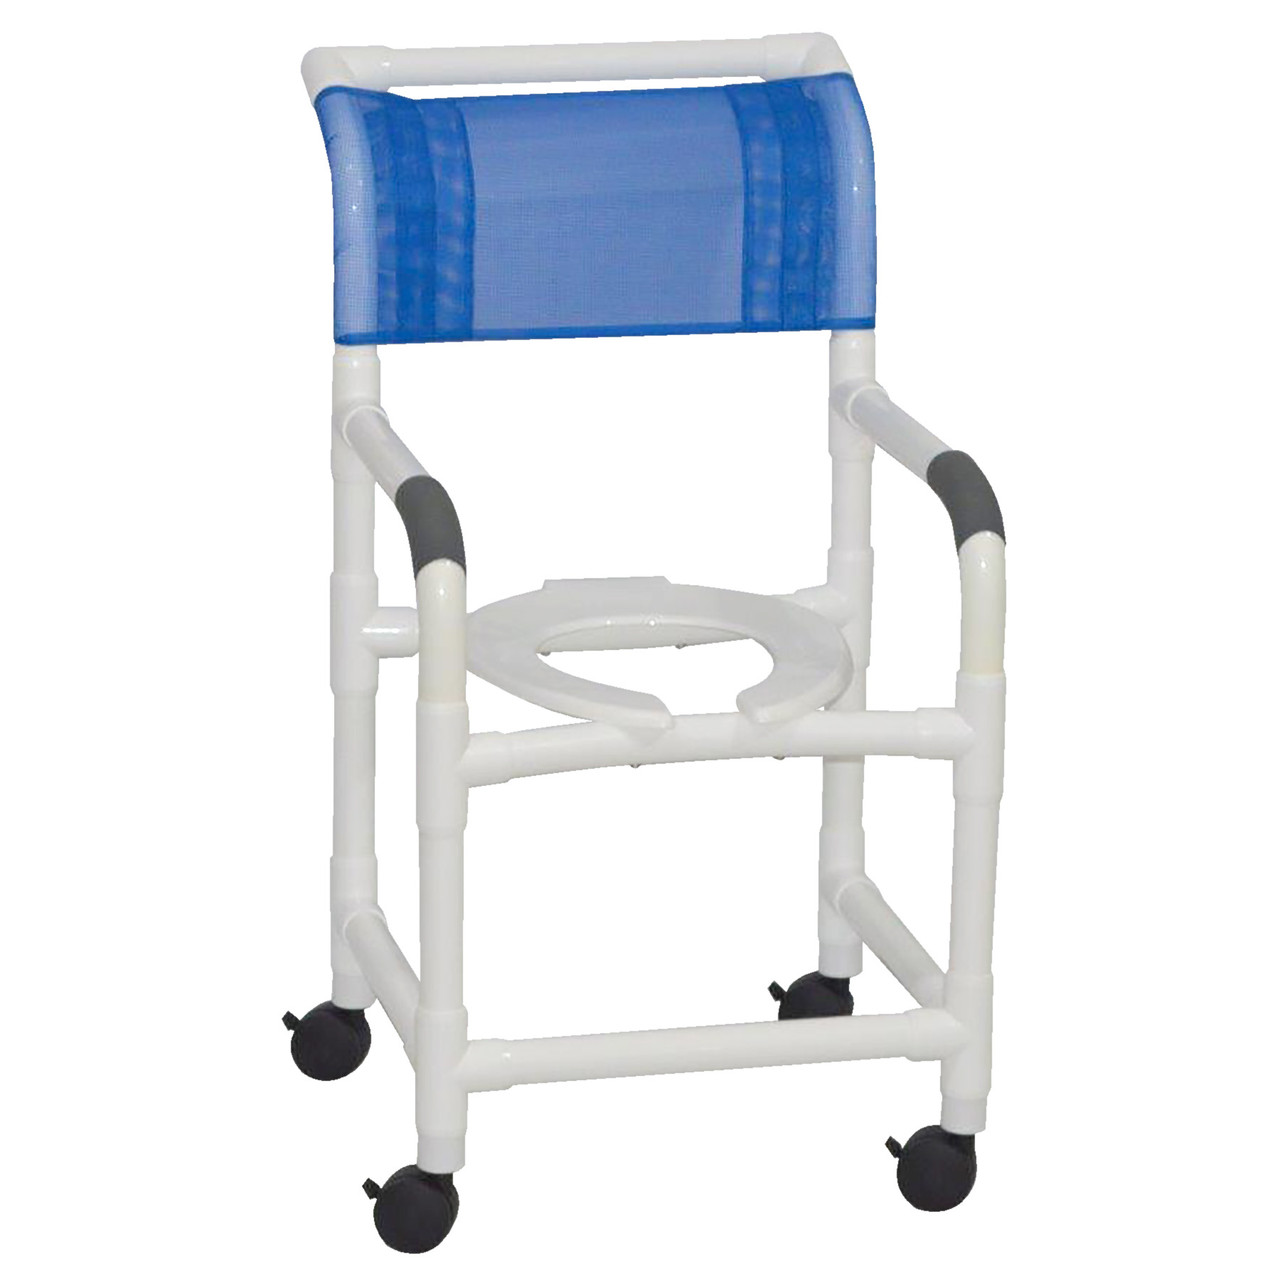 MJM 18" Shower Chair With HARD Seat and NO PAIL. FREE SHIPPING